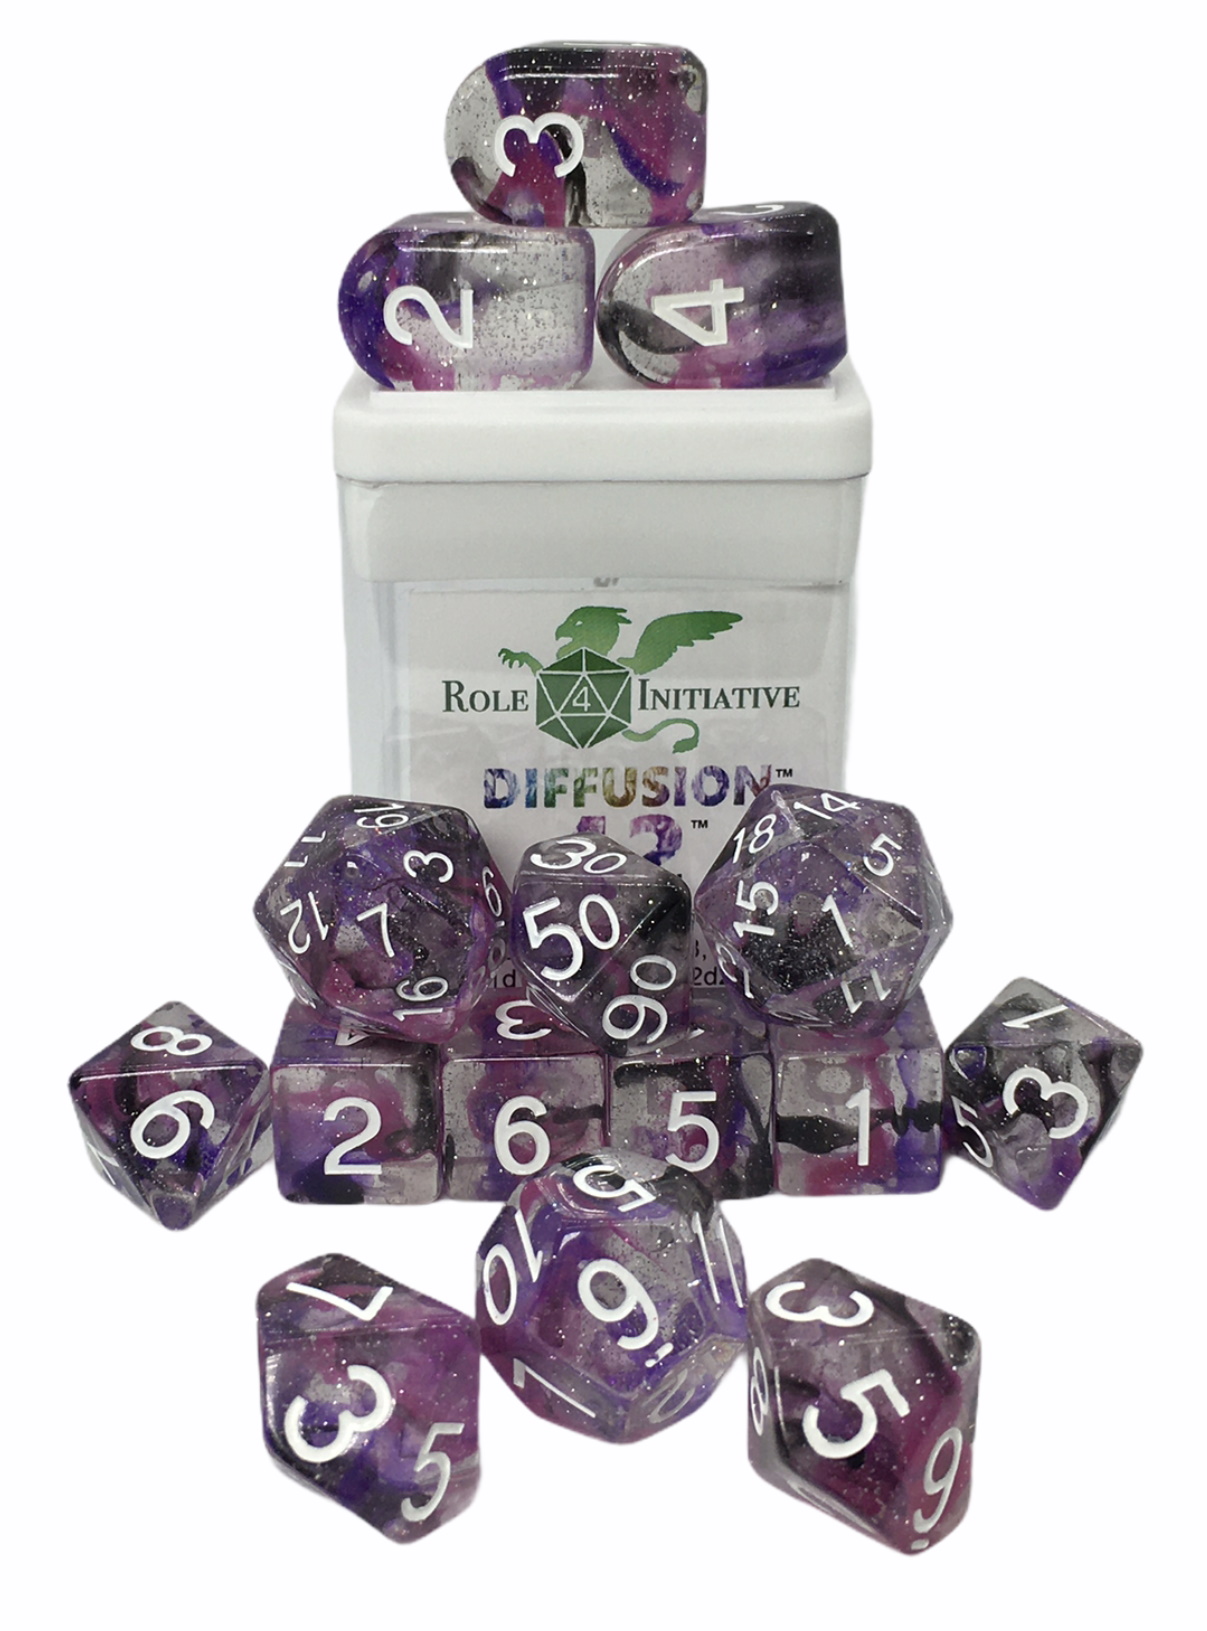 Role 4 Initiative: Polyhedral 15 Dice Set: Diffusion 42 Arch D4 